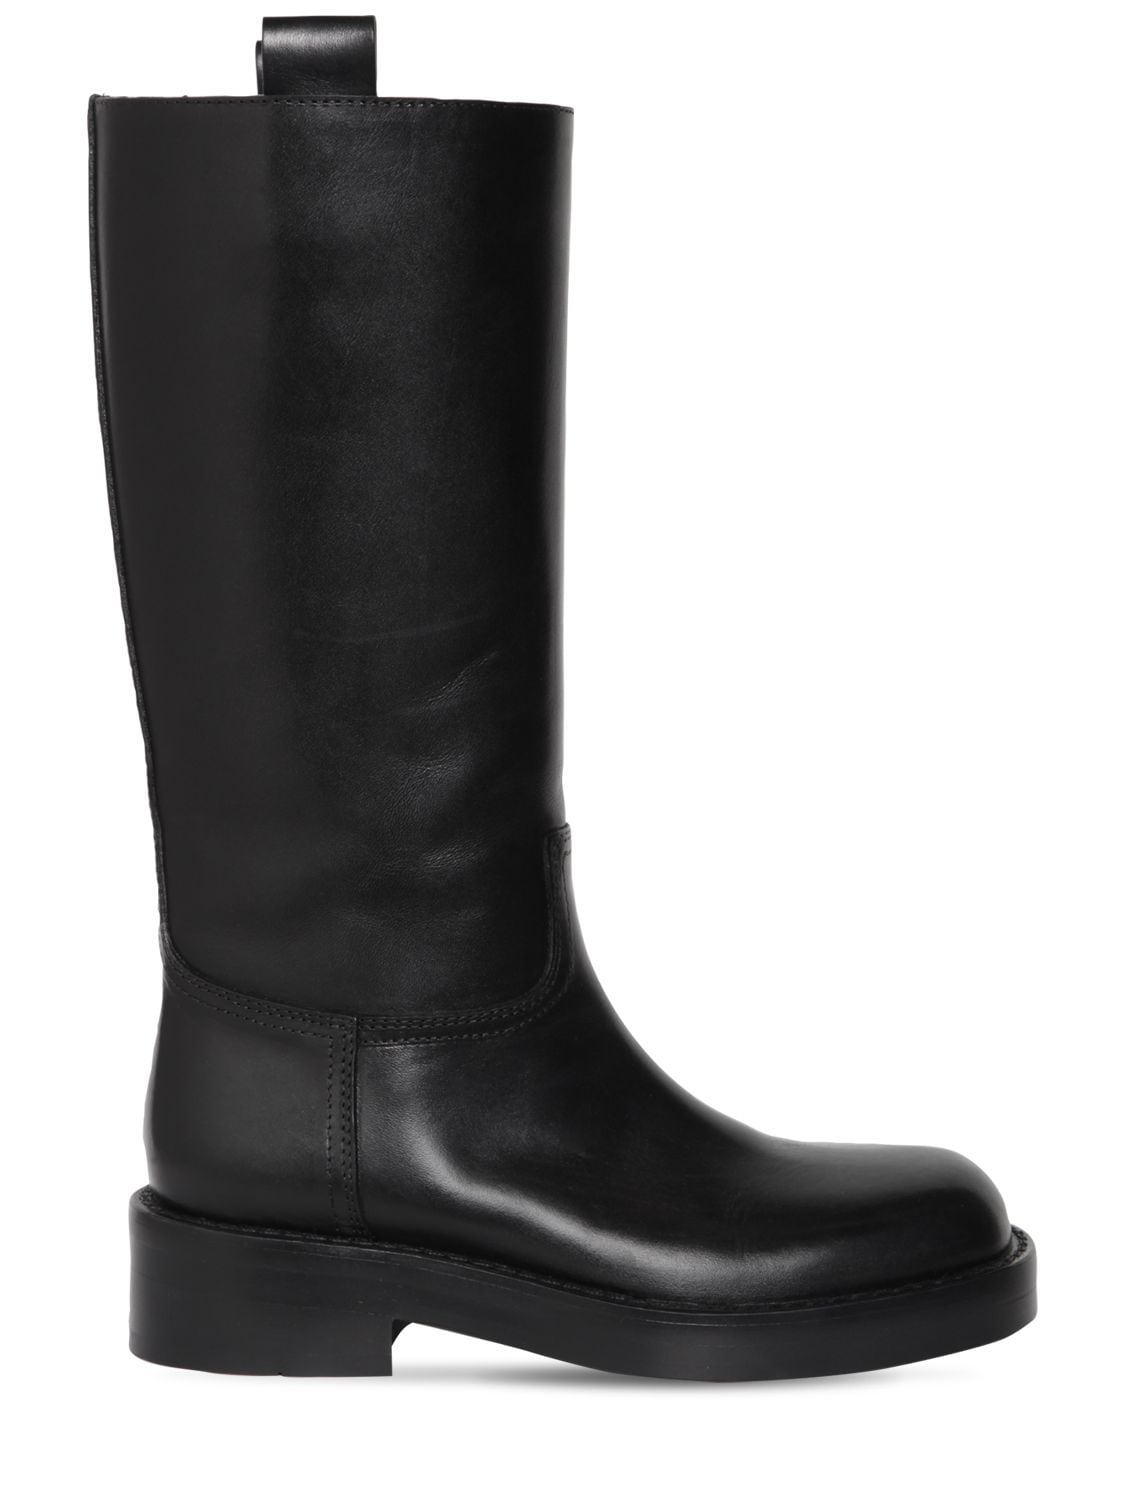 ANN DEMEULEMEESTER 25MM STEIN BRUSHED LEATHER BOOTS,74I02U001-MDK50